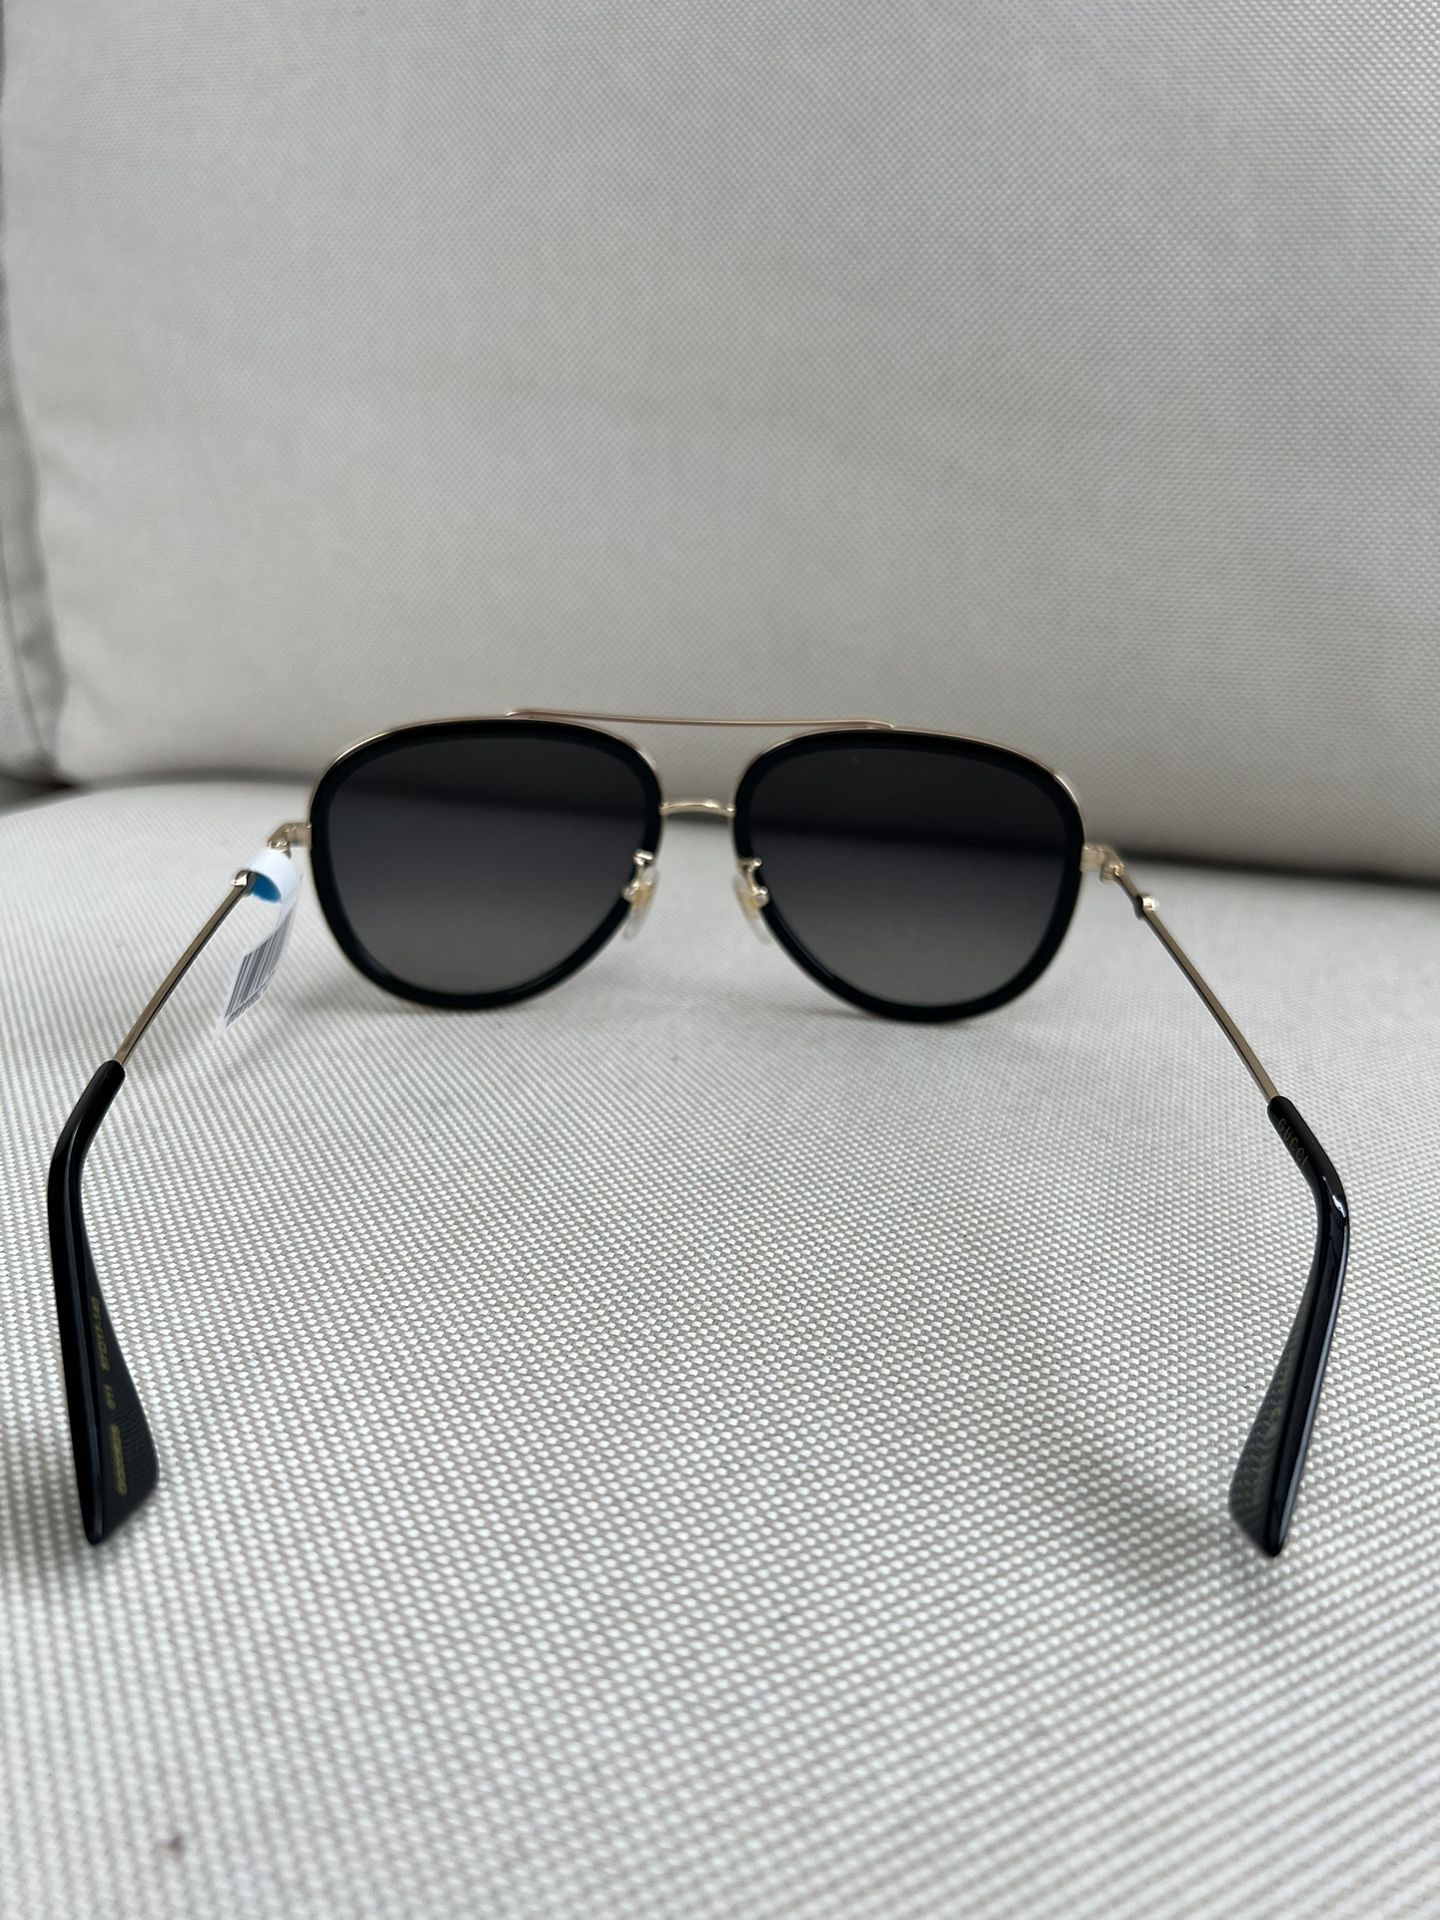 Gucci GG0062S 011 57 Metal Aviator Sunglasses *AUTHENTIC* for Sale in ...